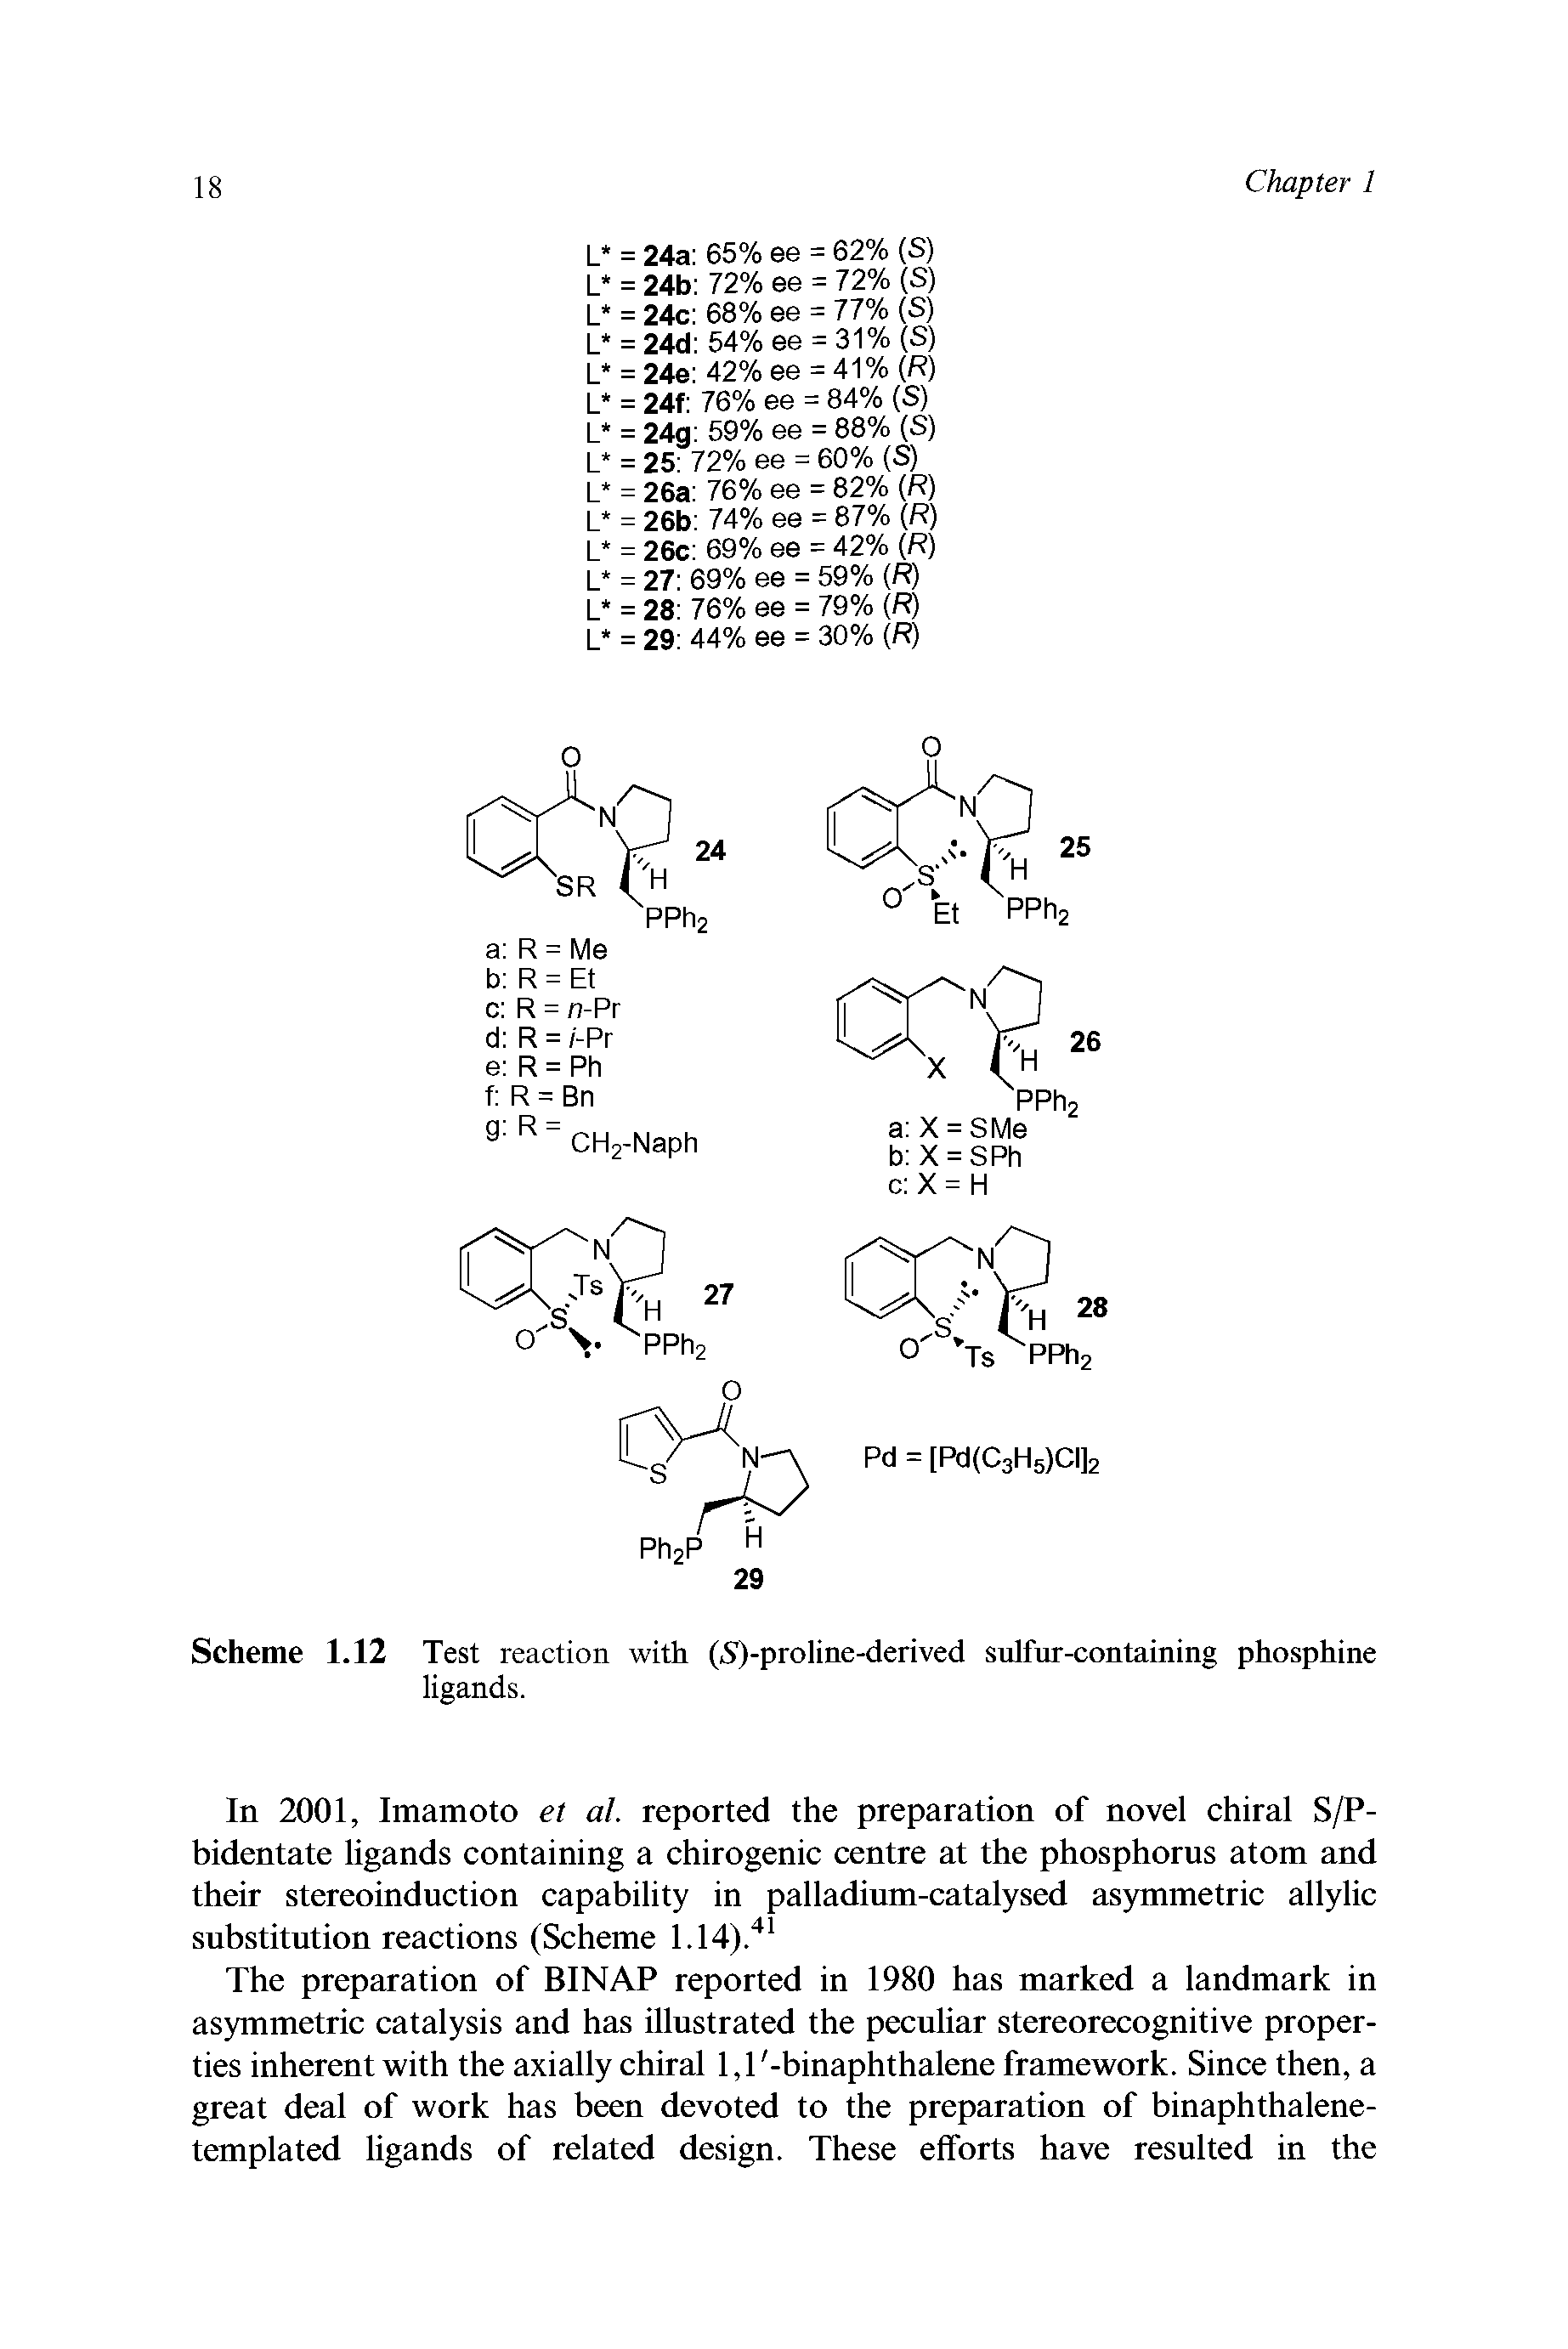 Scheme 1.12 Test reaction with (5)-proline-derived sulfur-containing phosphine ligands.